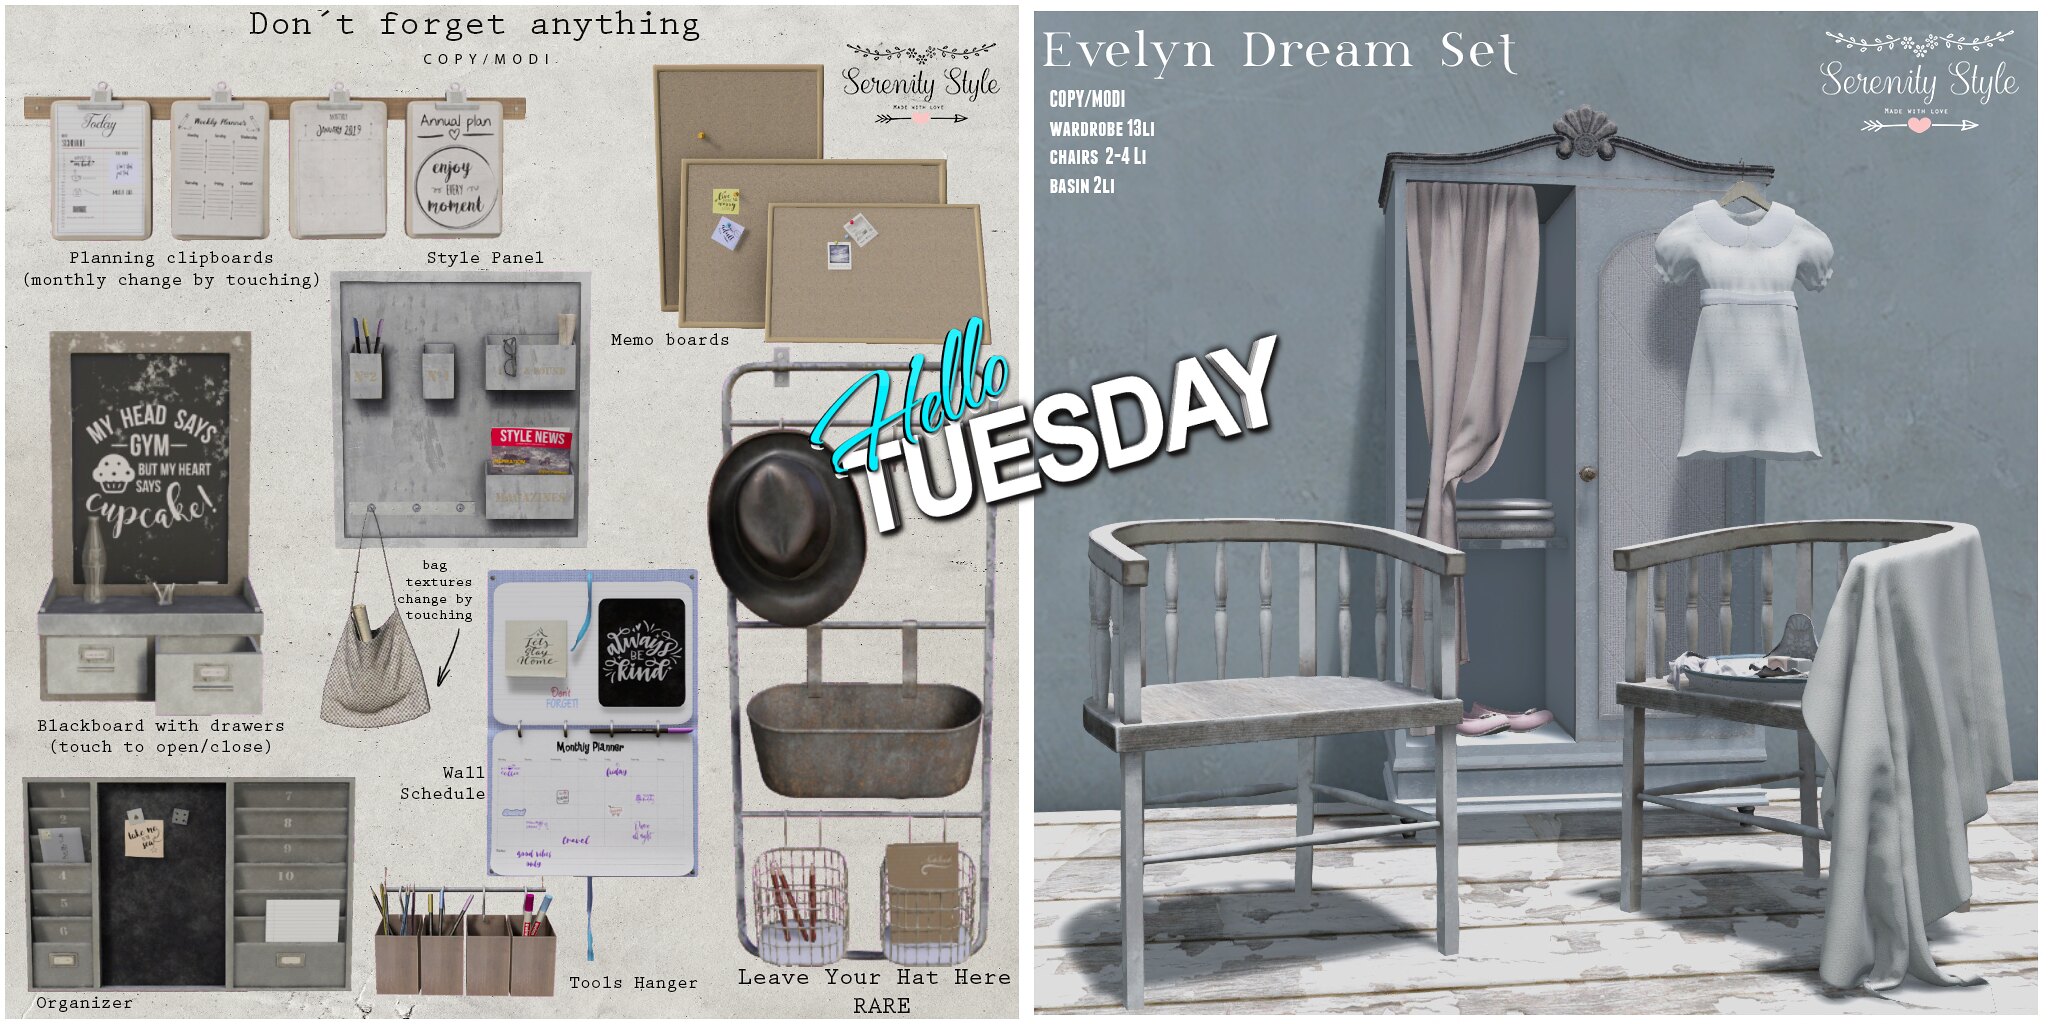 Serenity Style – Evelyn Dream Set and Don’t Forget Anything Collection